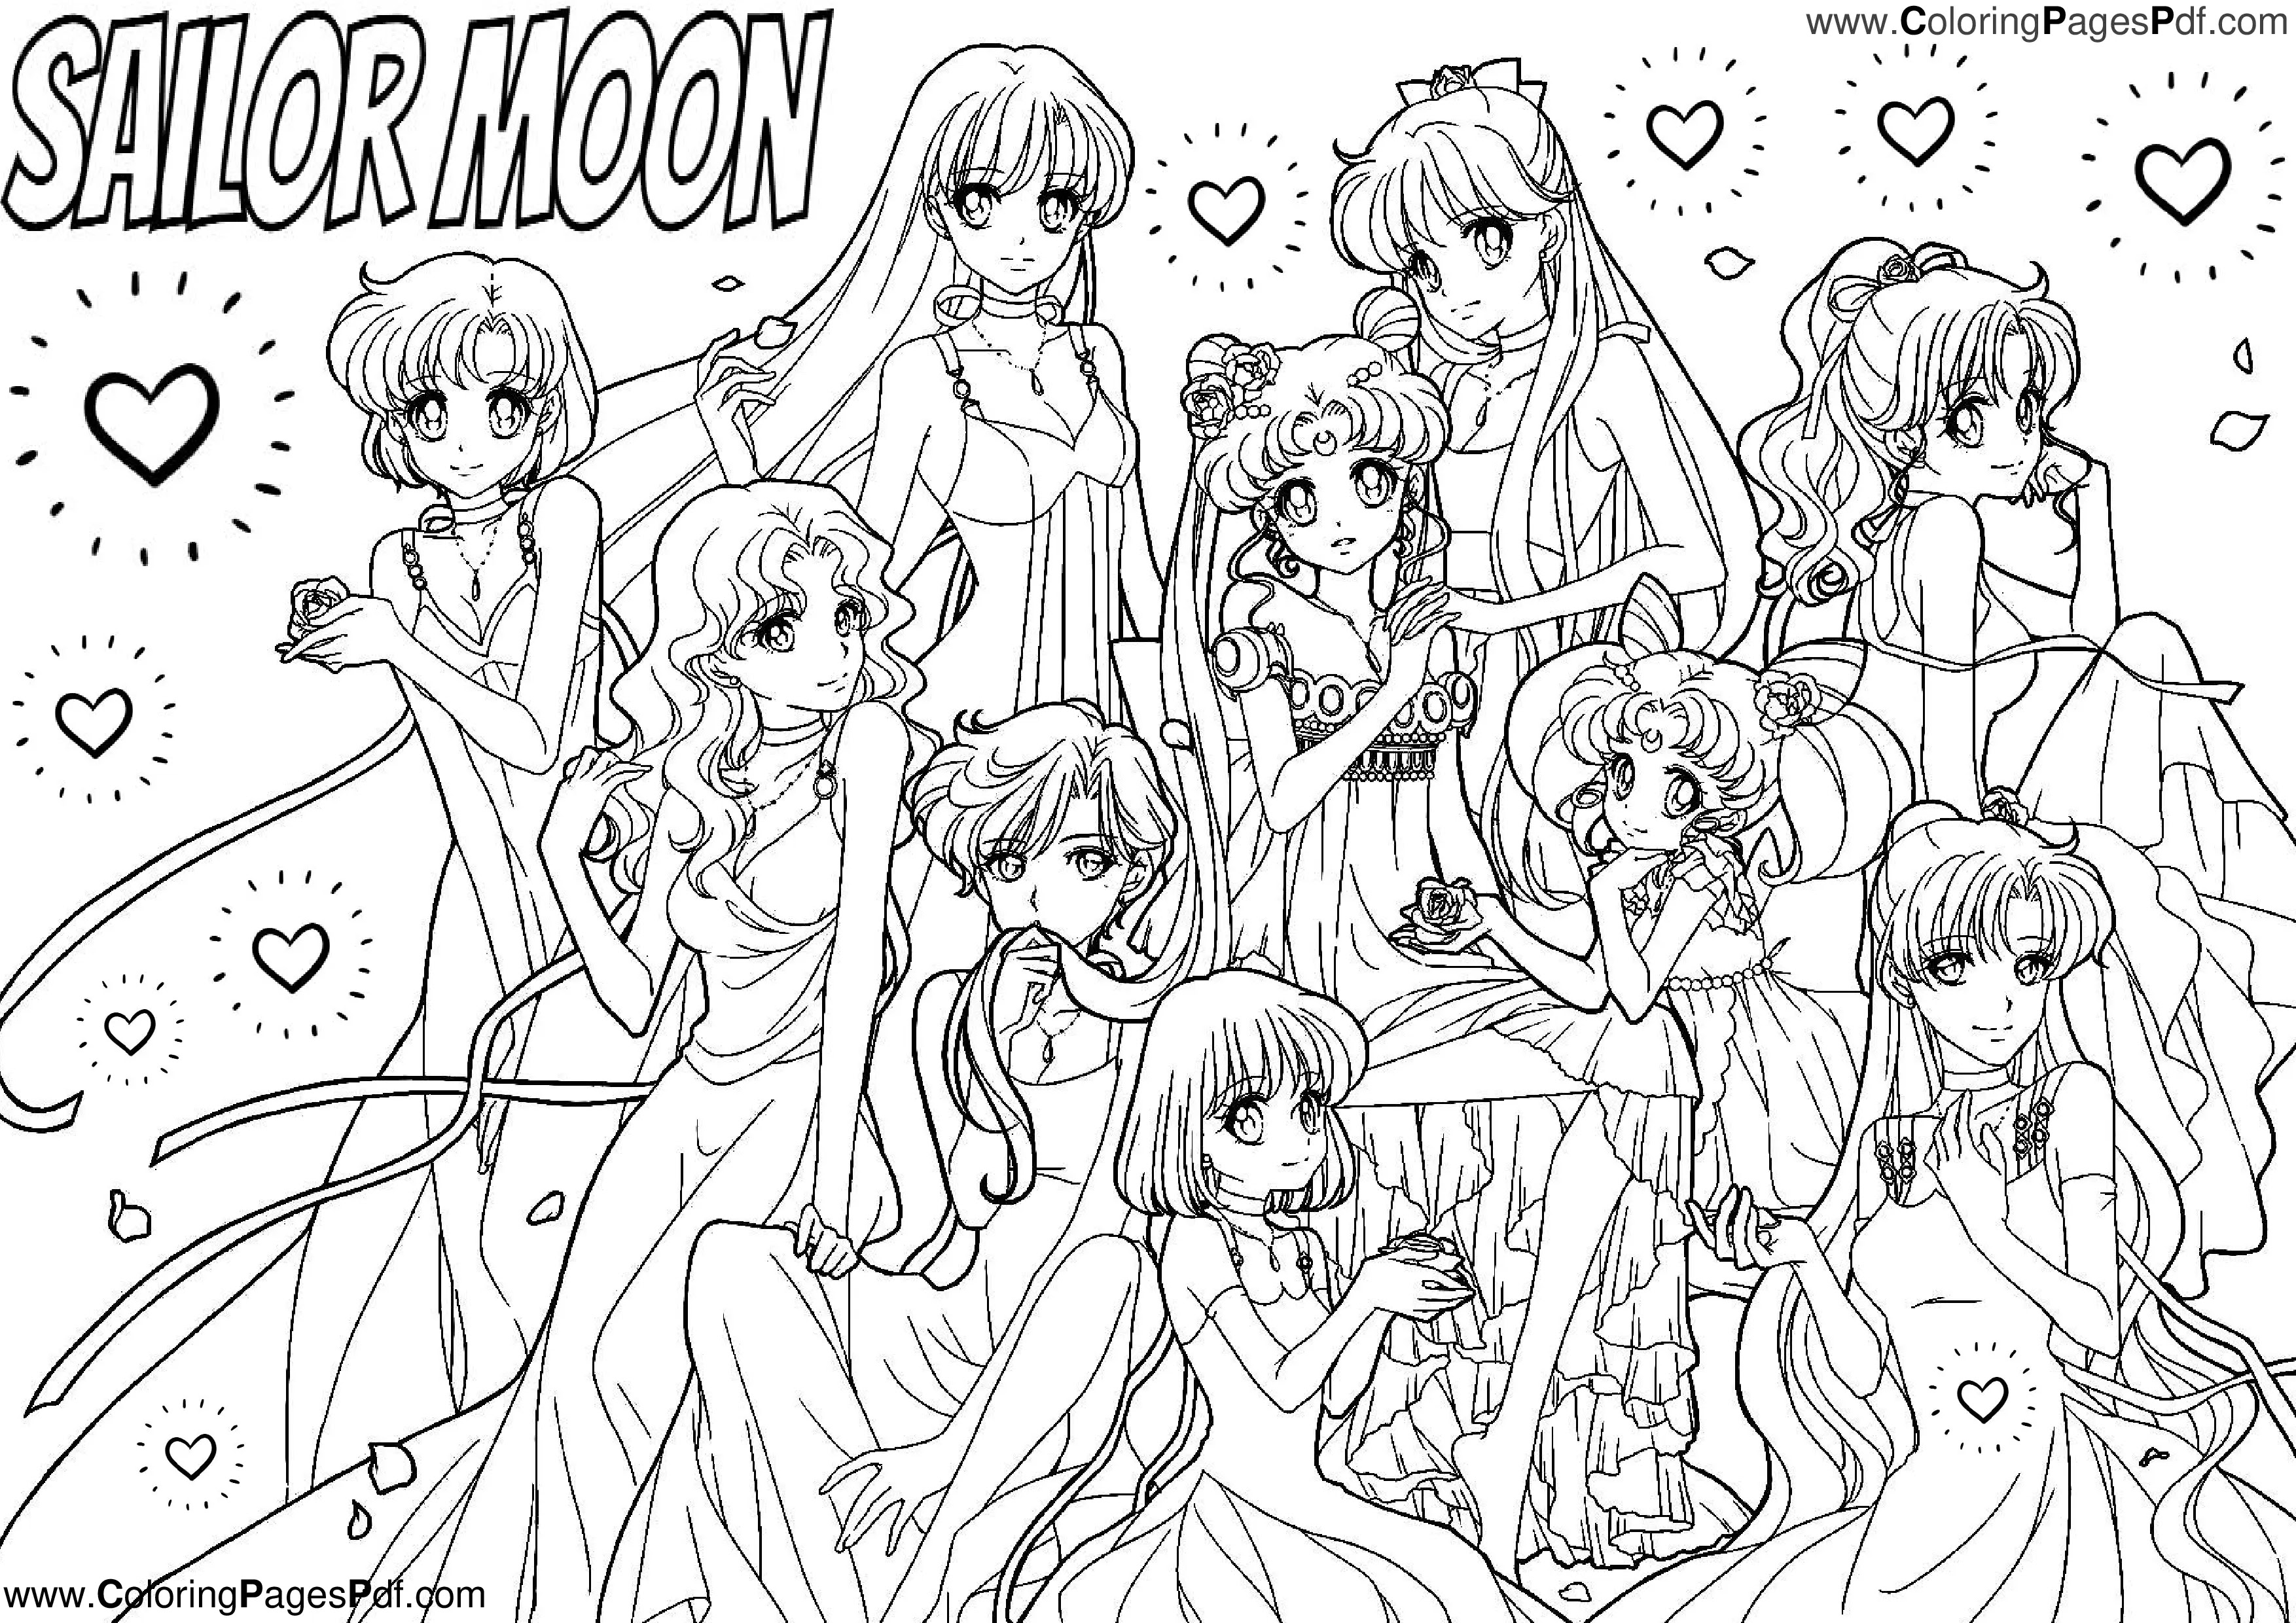 Free sailor moon coloring pages